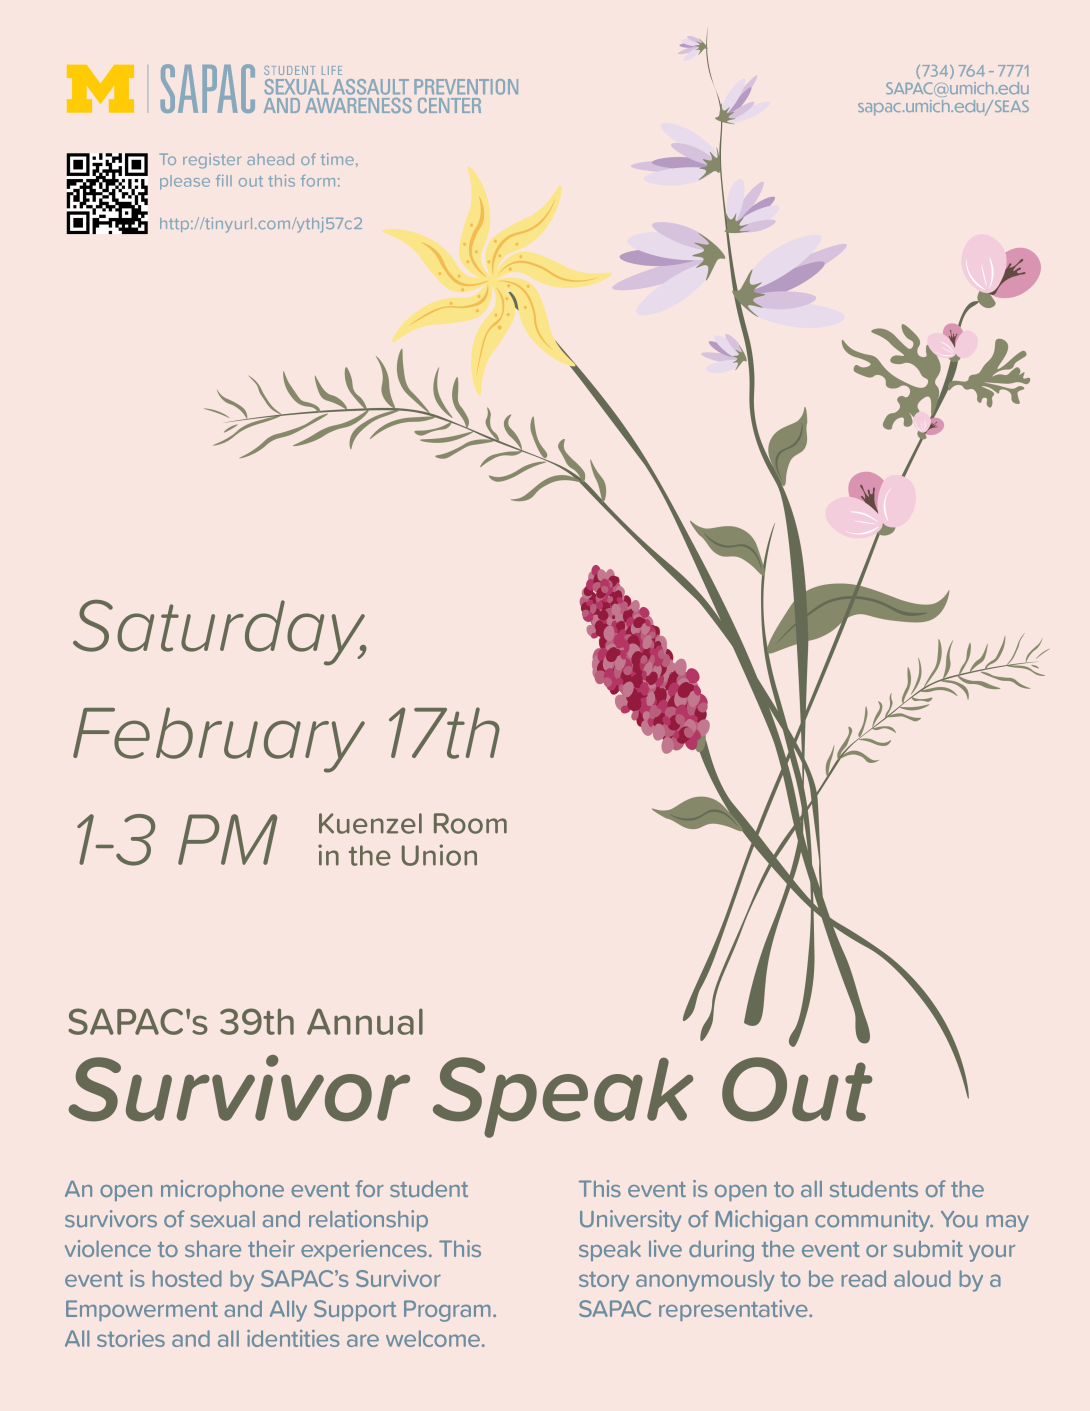 Flier with bouquet of wild flowers with text around it sharing details that mirror the details of Speak Out found on this page.